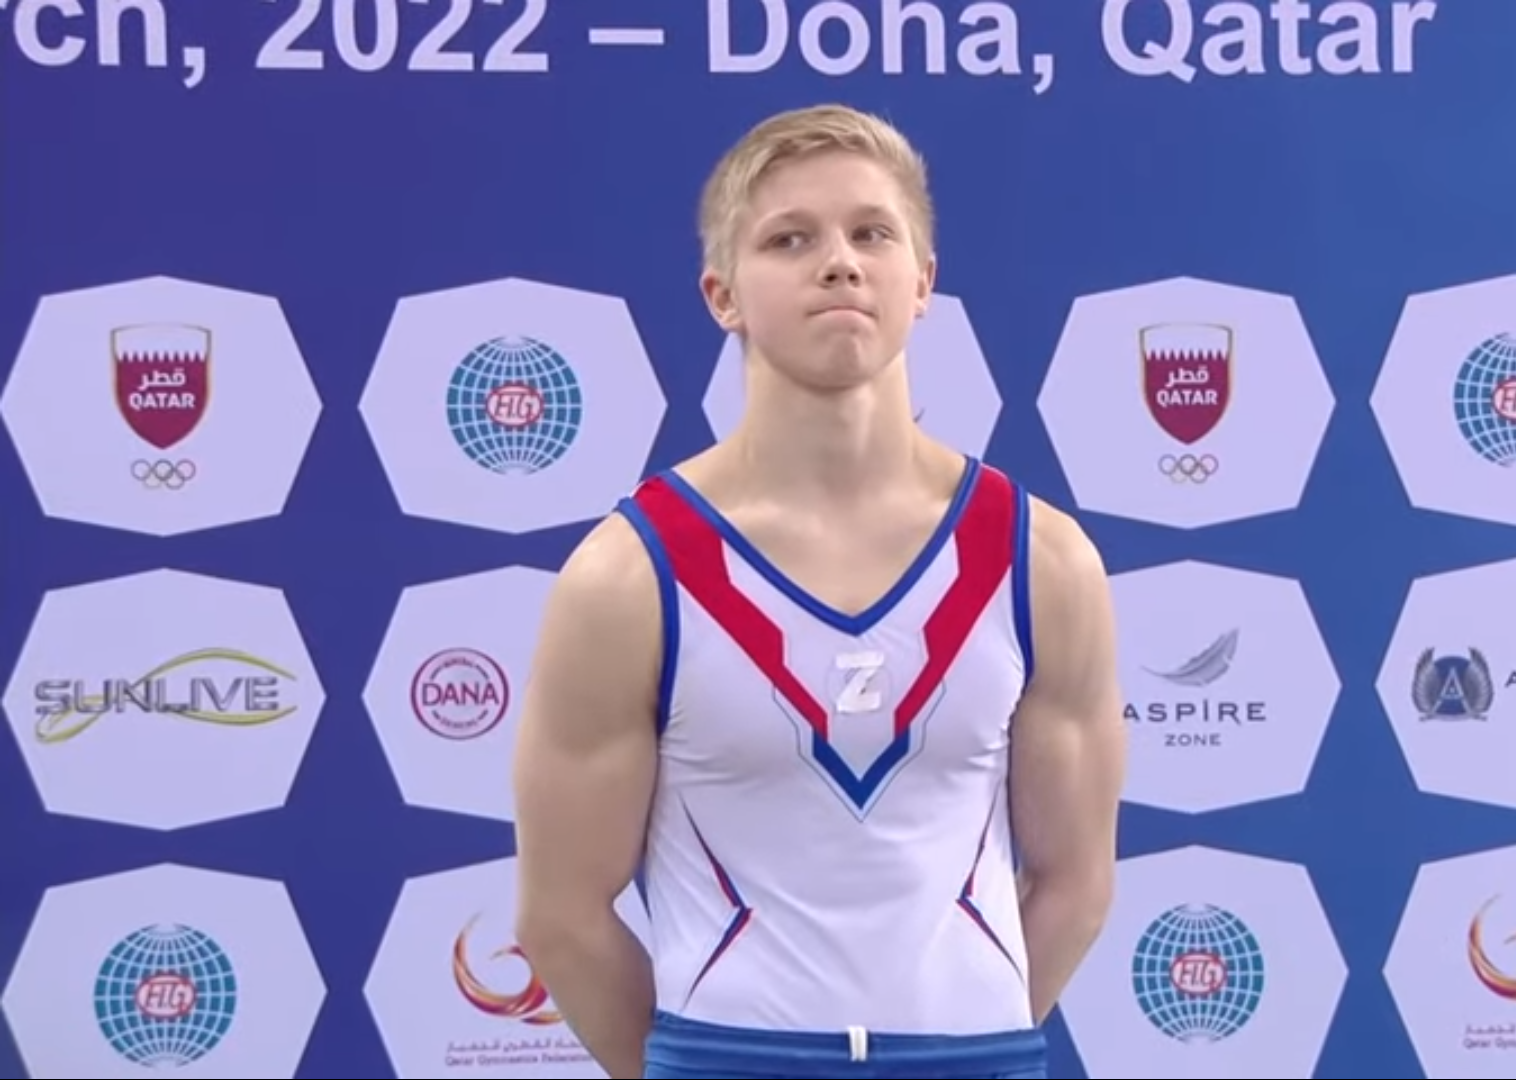 Ivan Kuliak is expected to compete at the Russian Cup, according to Valentina Rodionenko ©YouTube